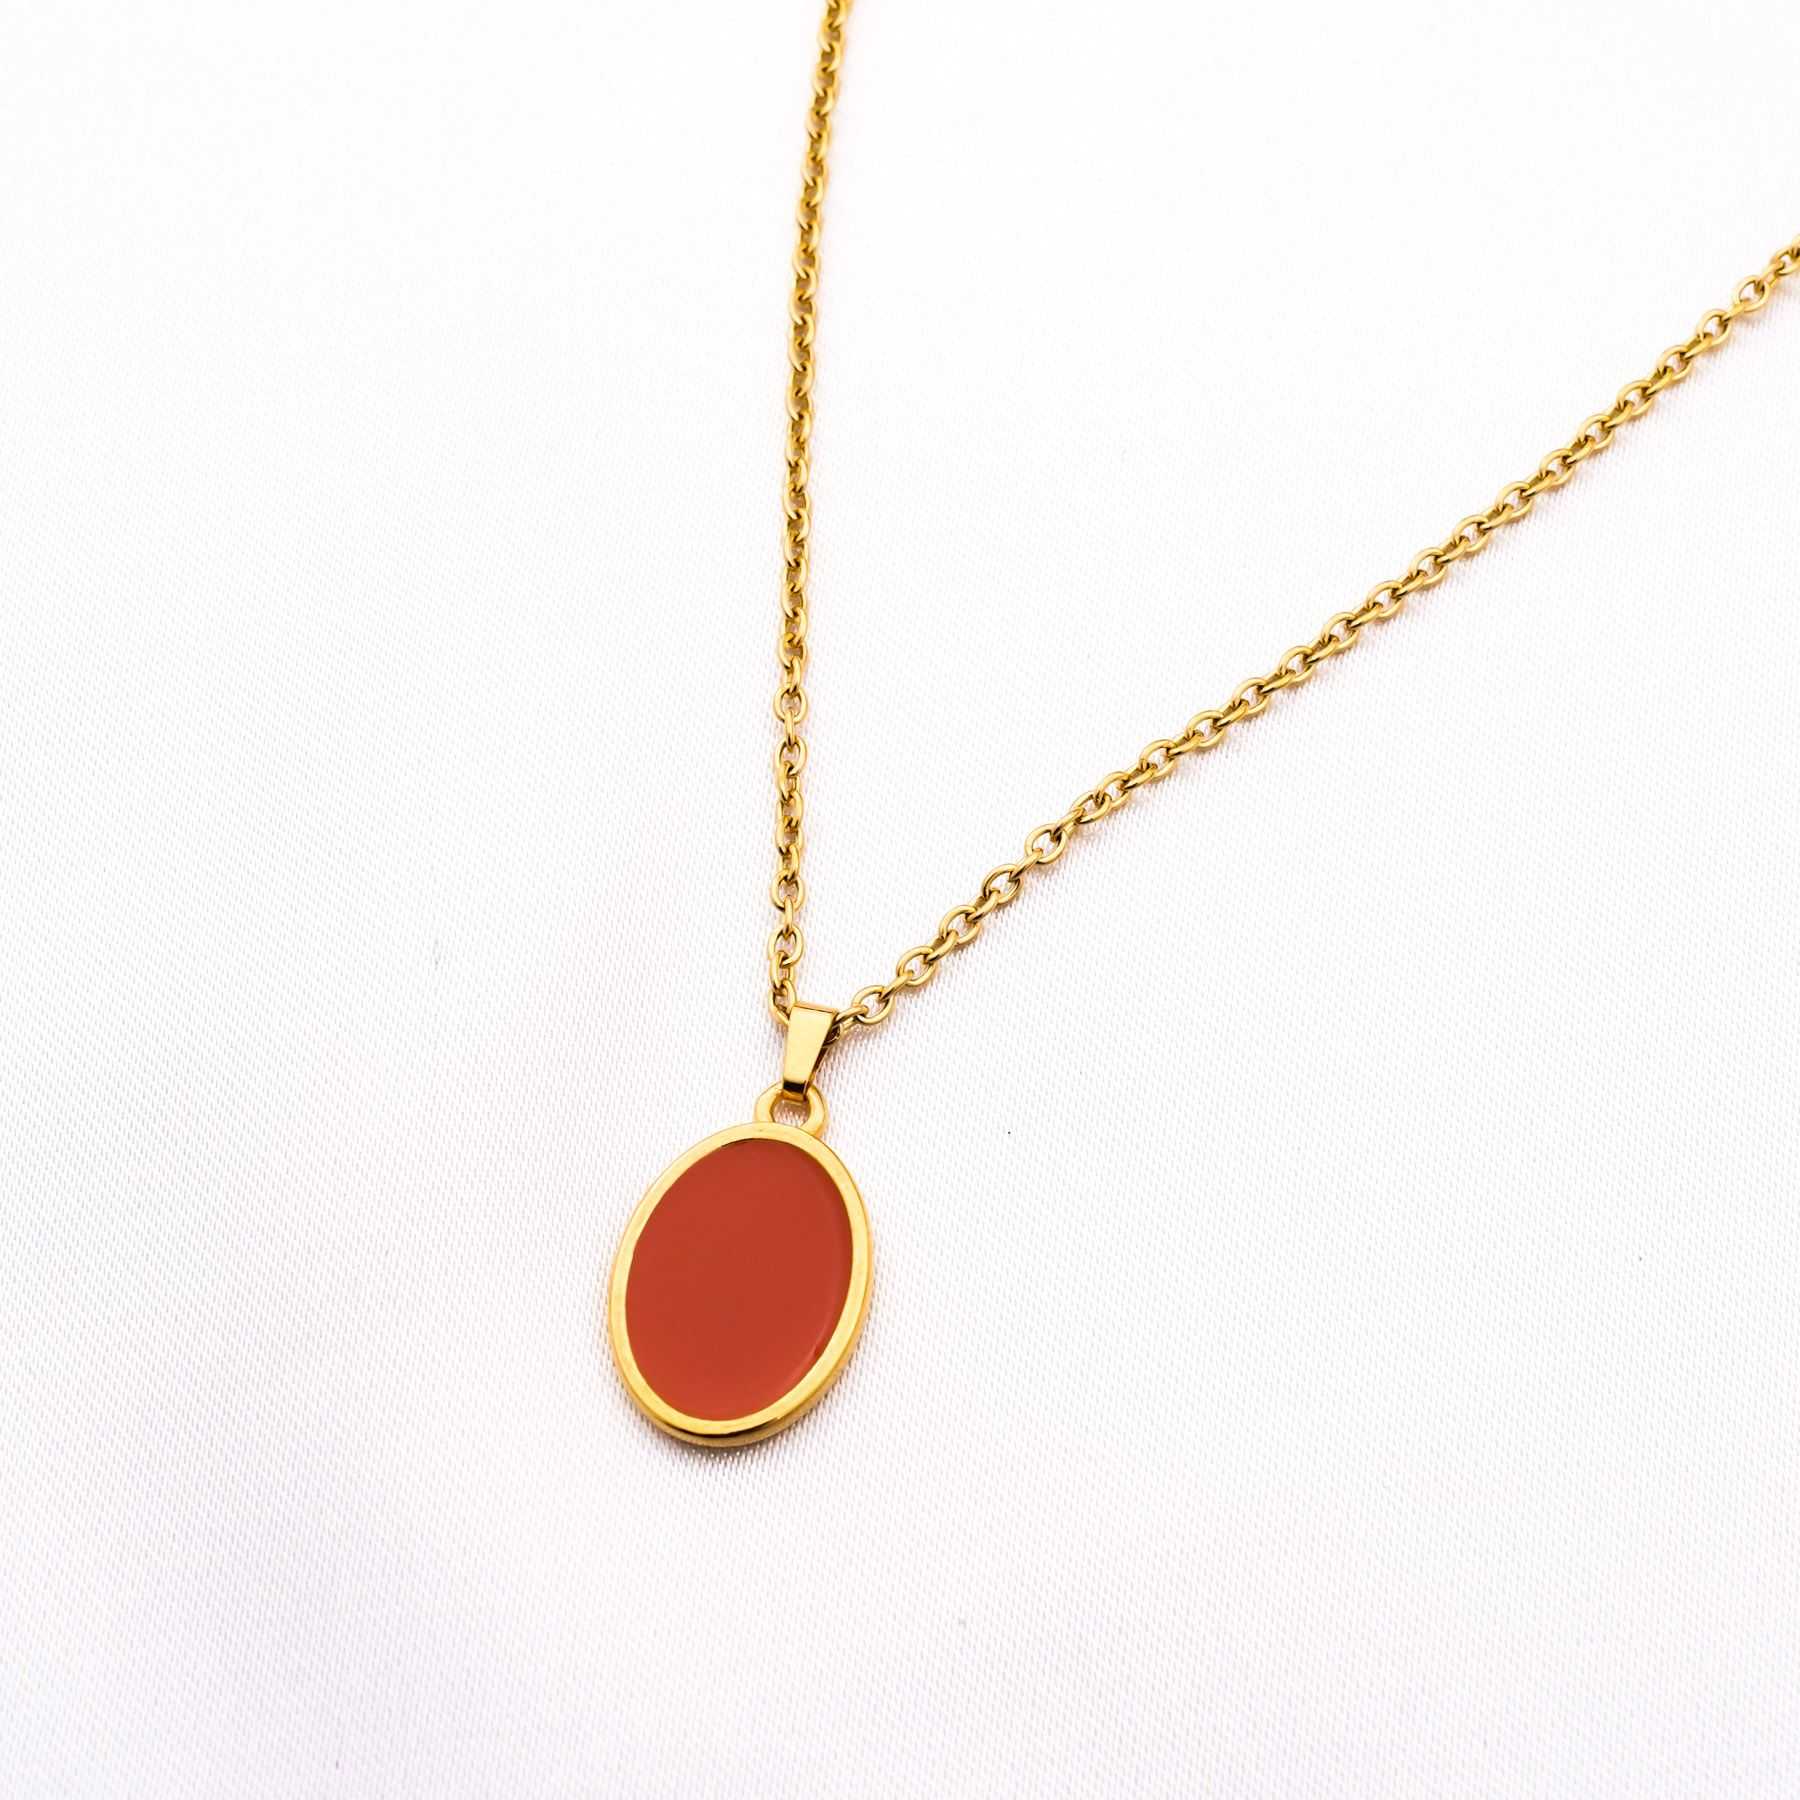 MIRROR NECKLACE - GOLD & RED